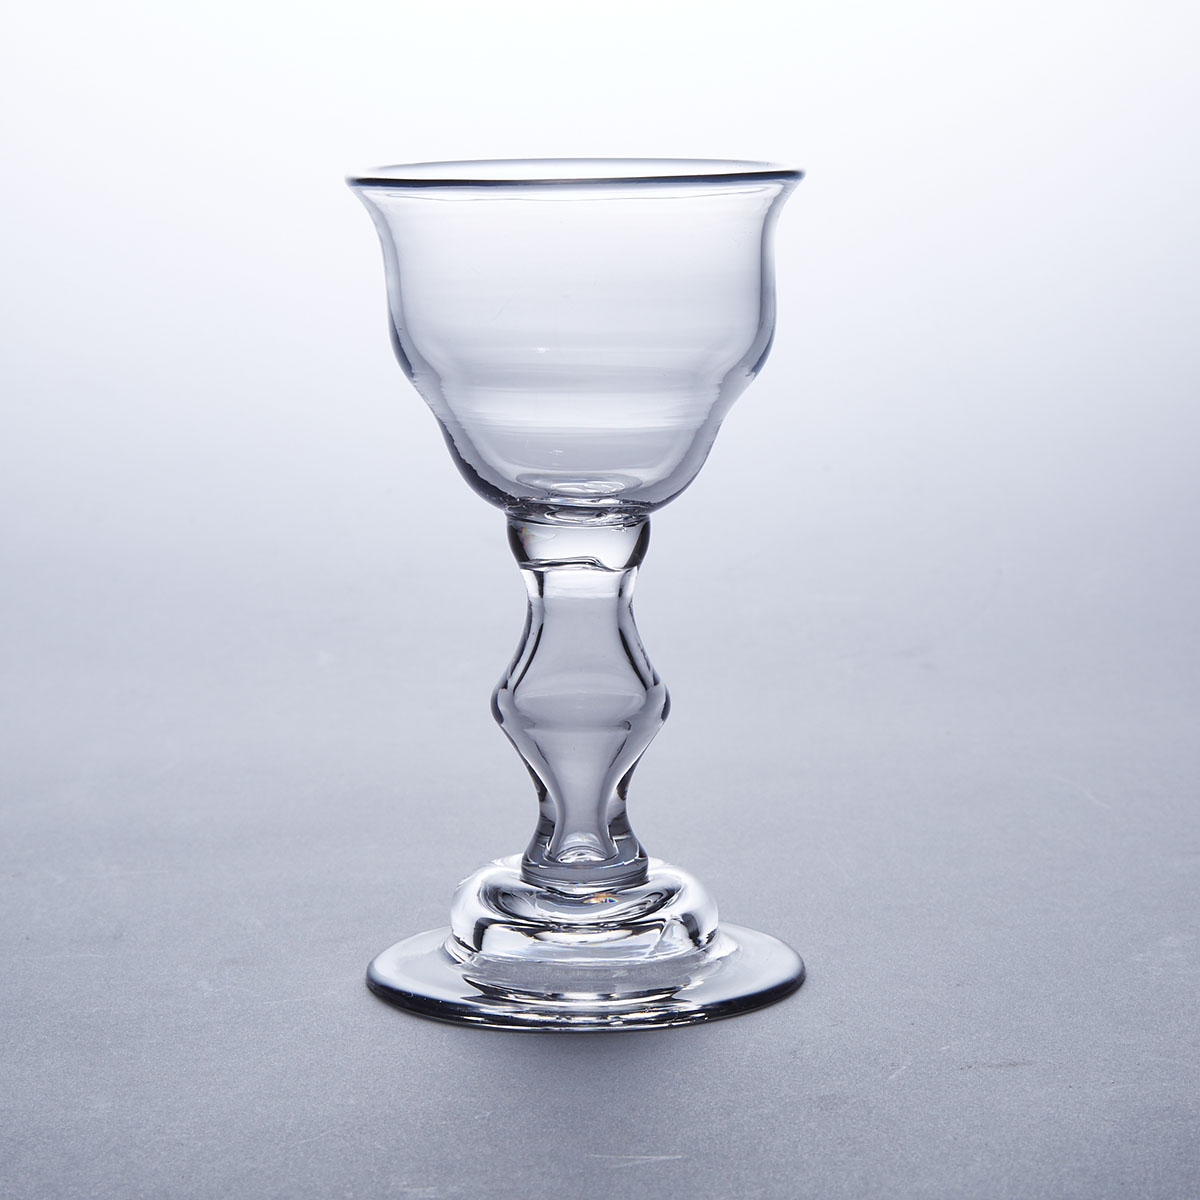 English Angular Knopped Balustroid Stemmed Sweetmeat or Champagne Glass, c.1730 